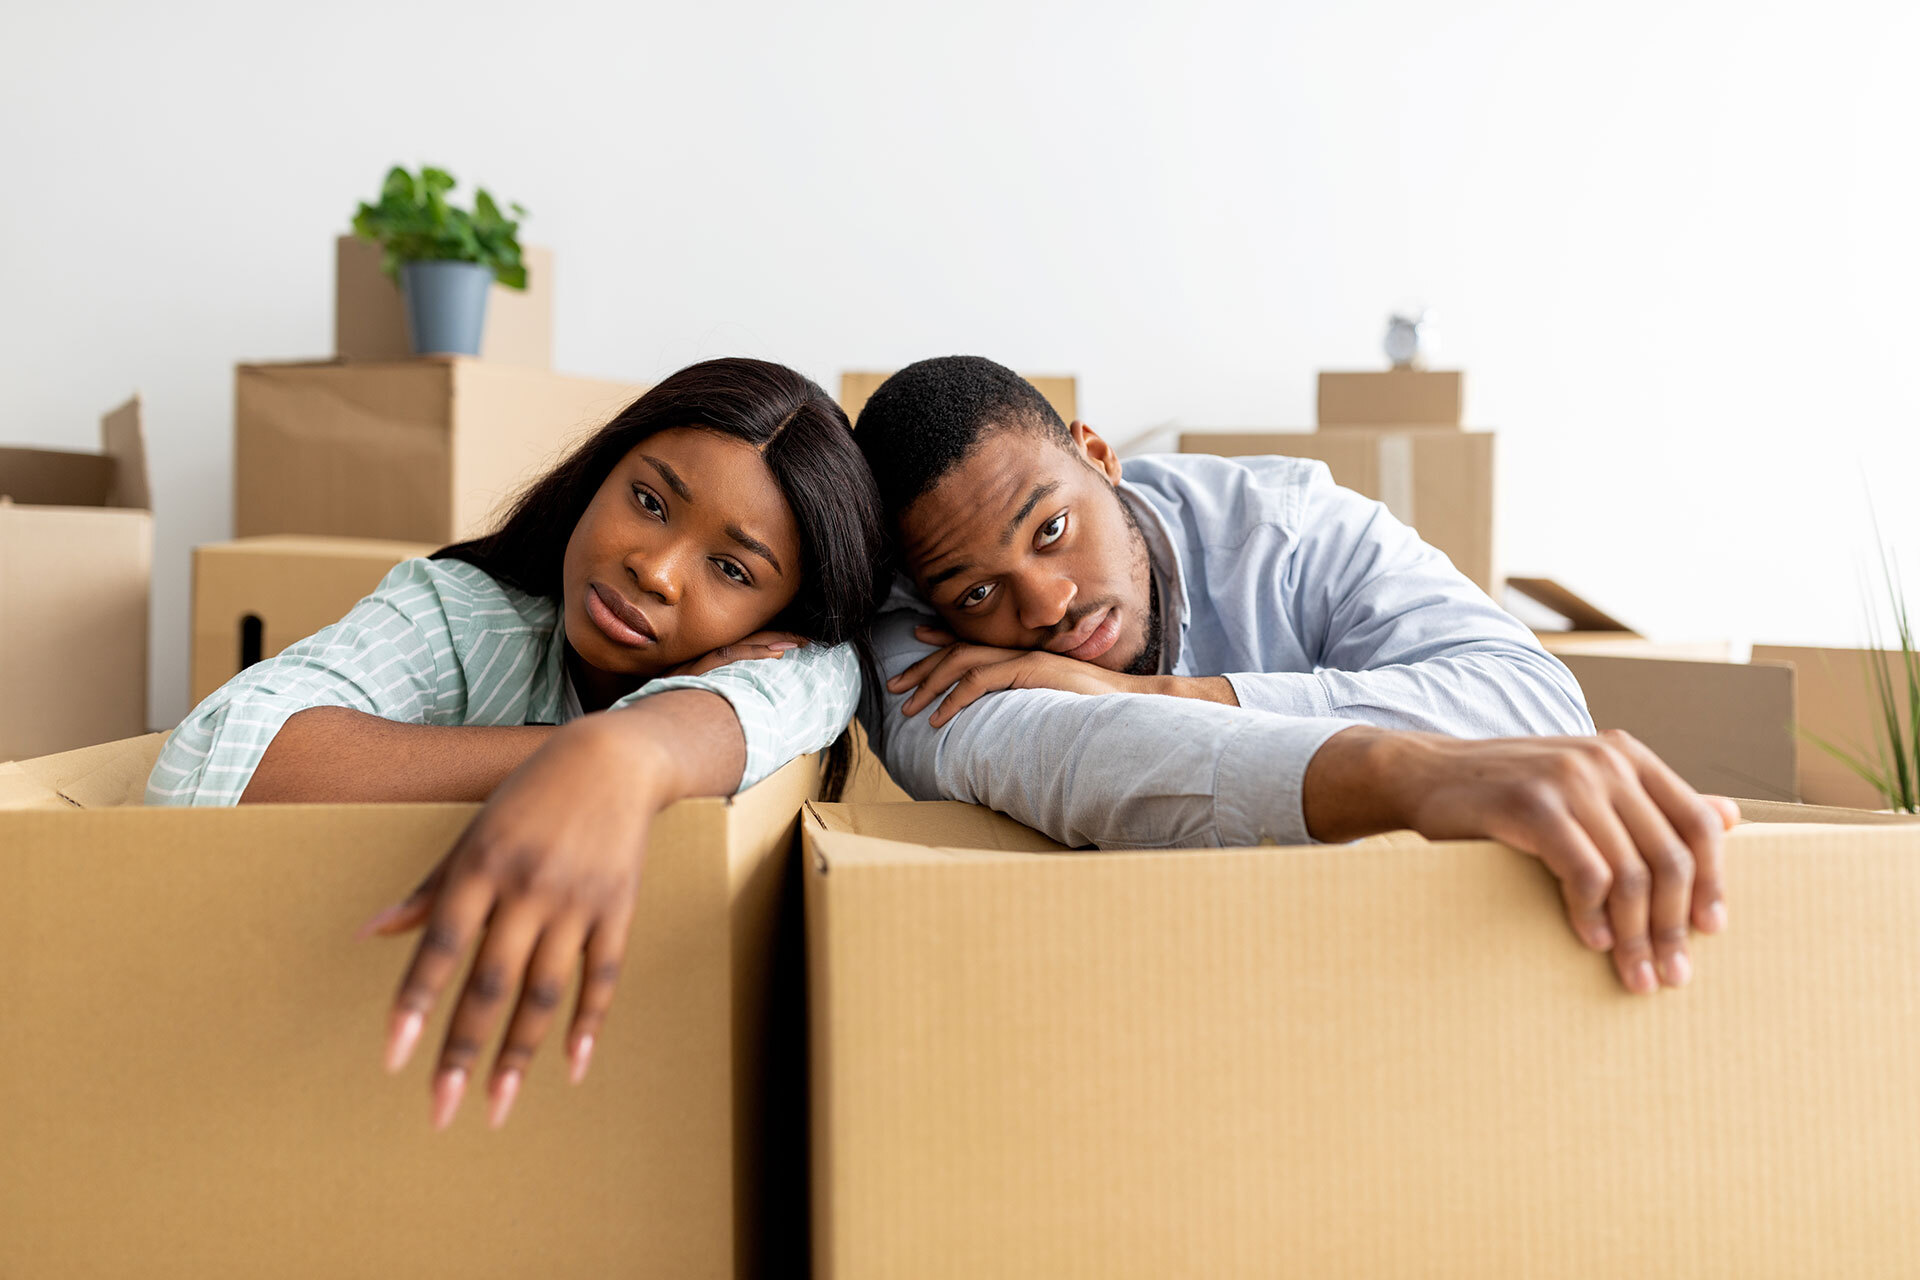 Two people stressed from moving that could be less stressful with moving tips